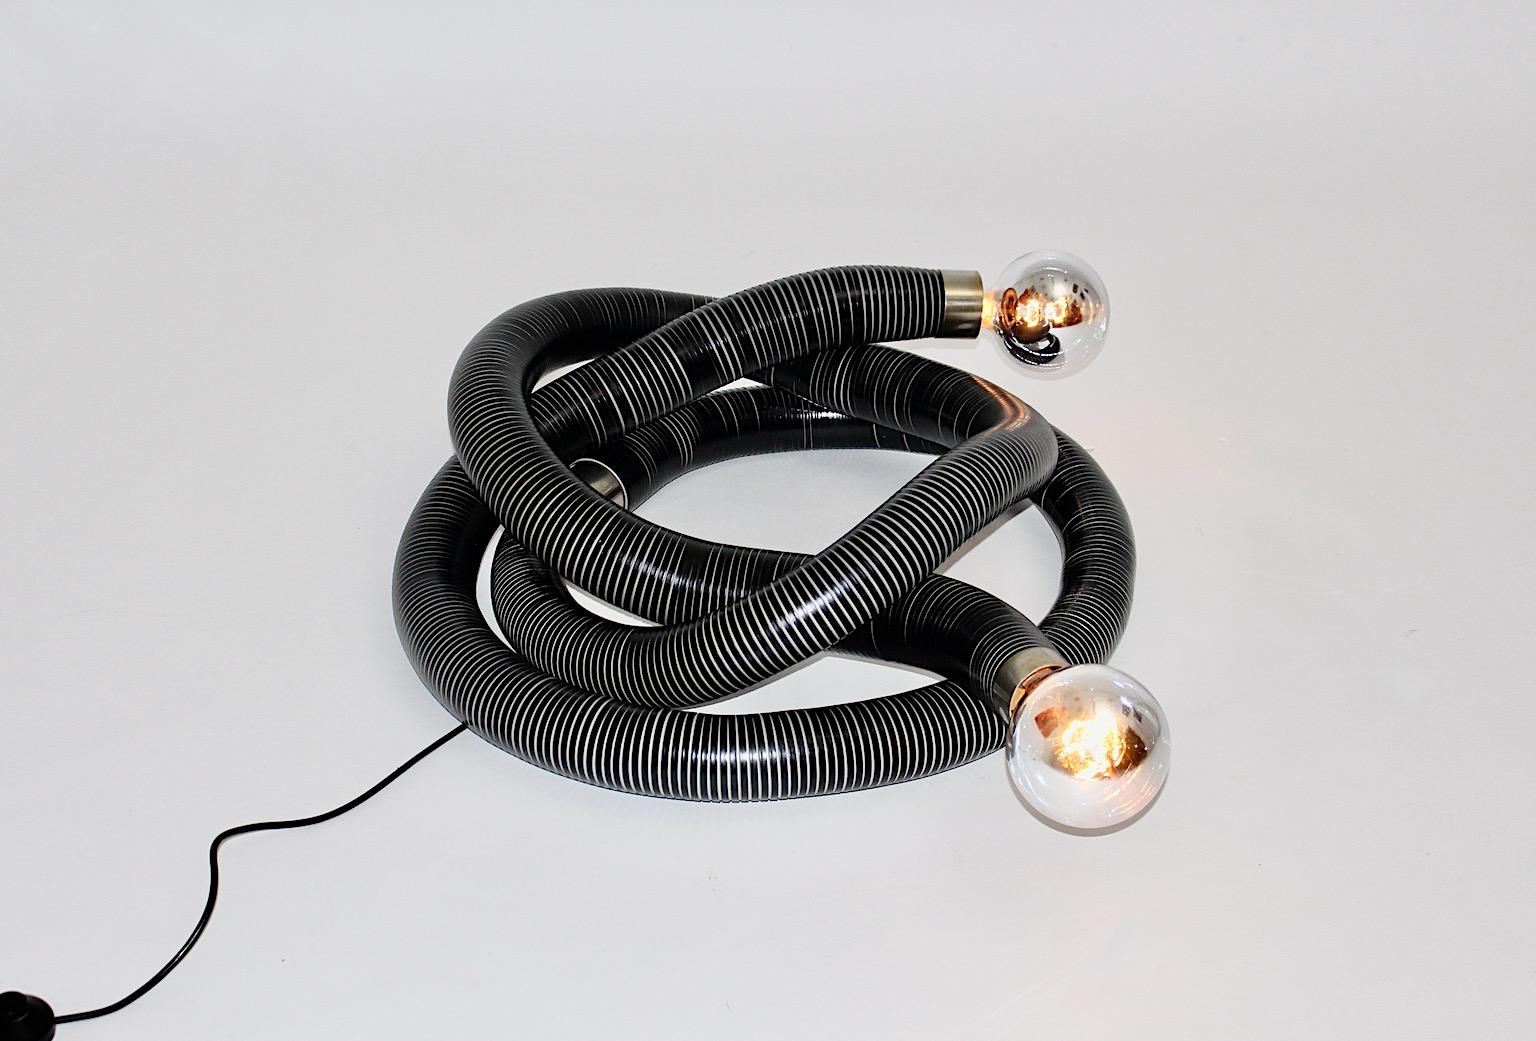 Space Age snake vintage tube floor lamp from plastic and metal in black and grey with flexibles tubes designed and manufactured Italy 1960s.
The design from this outstanding floor lamp is similar to Boalum by Gianfranco Frattini.
Flexible metal